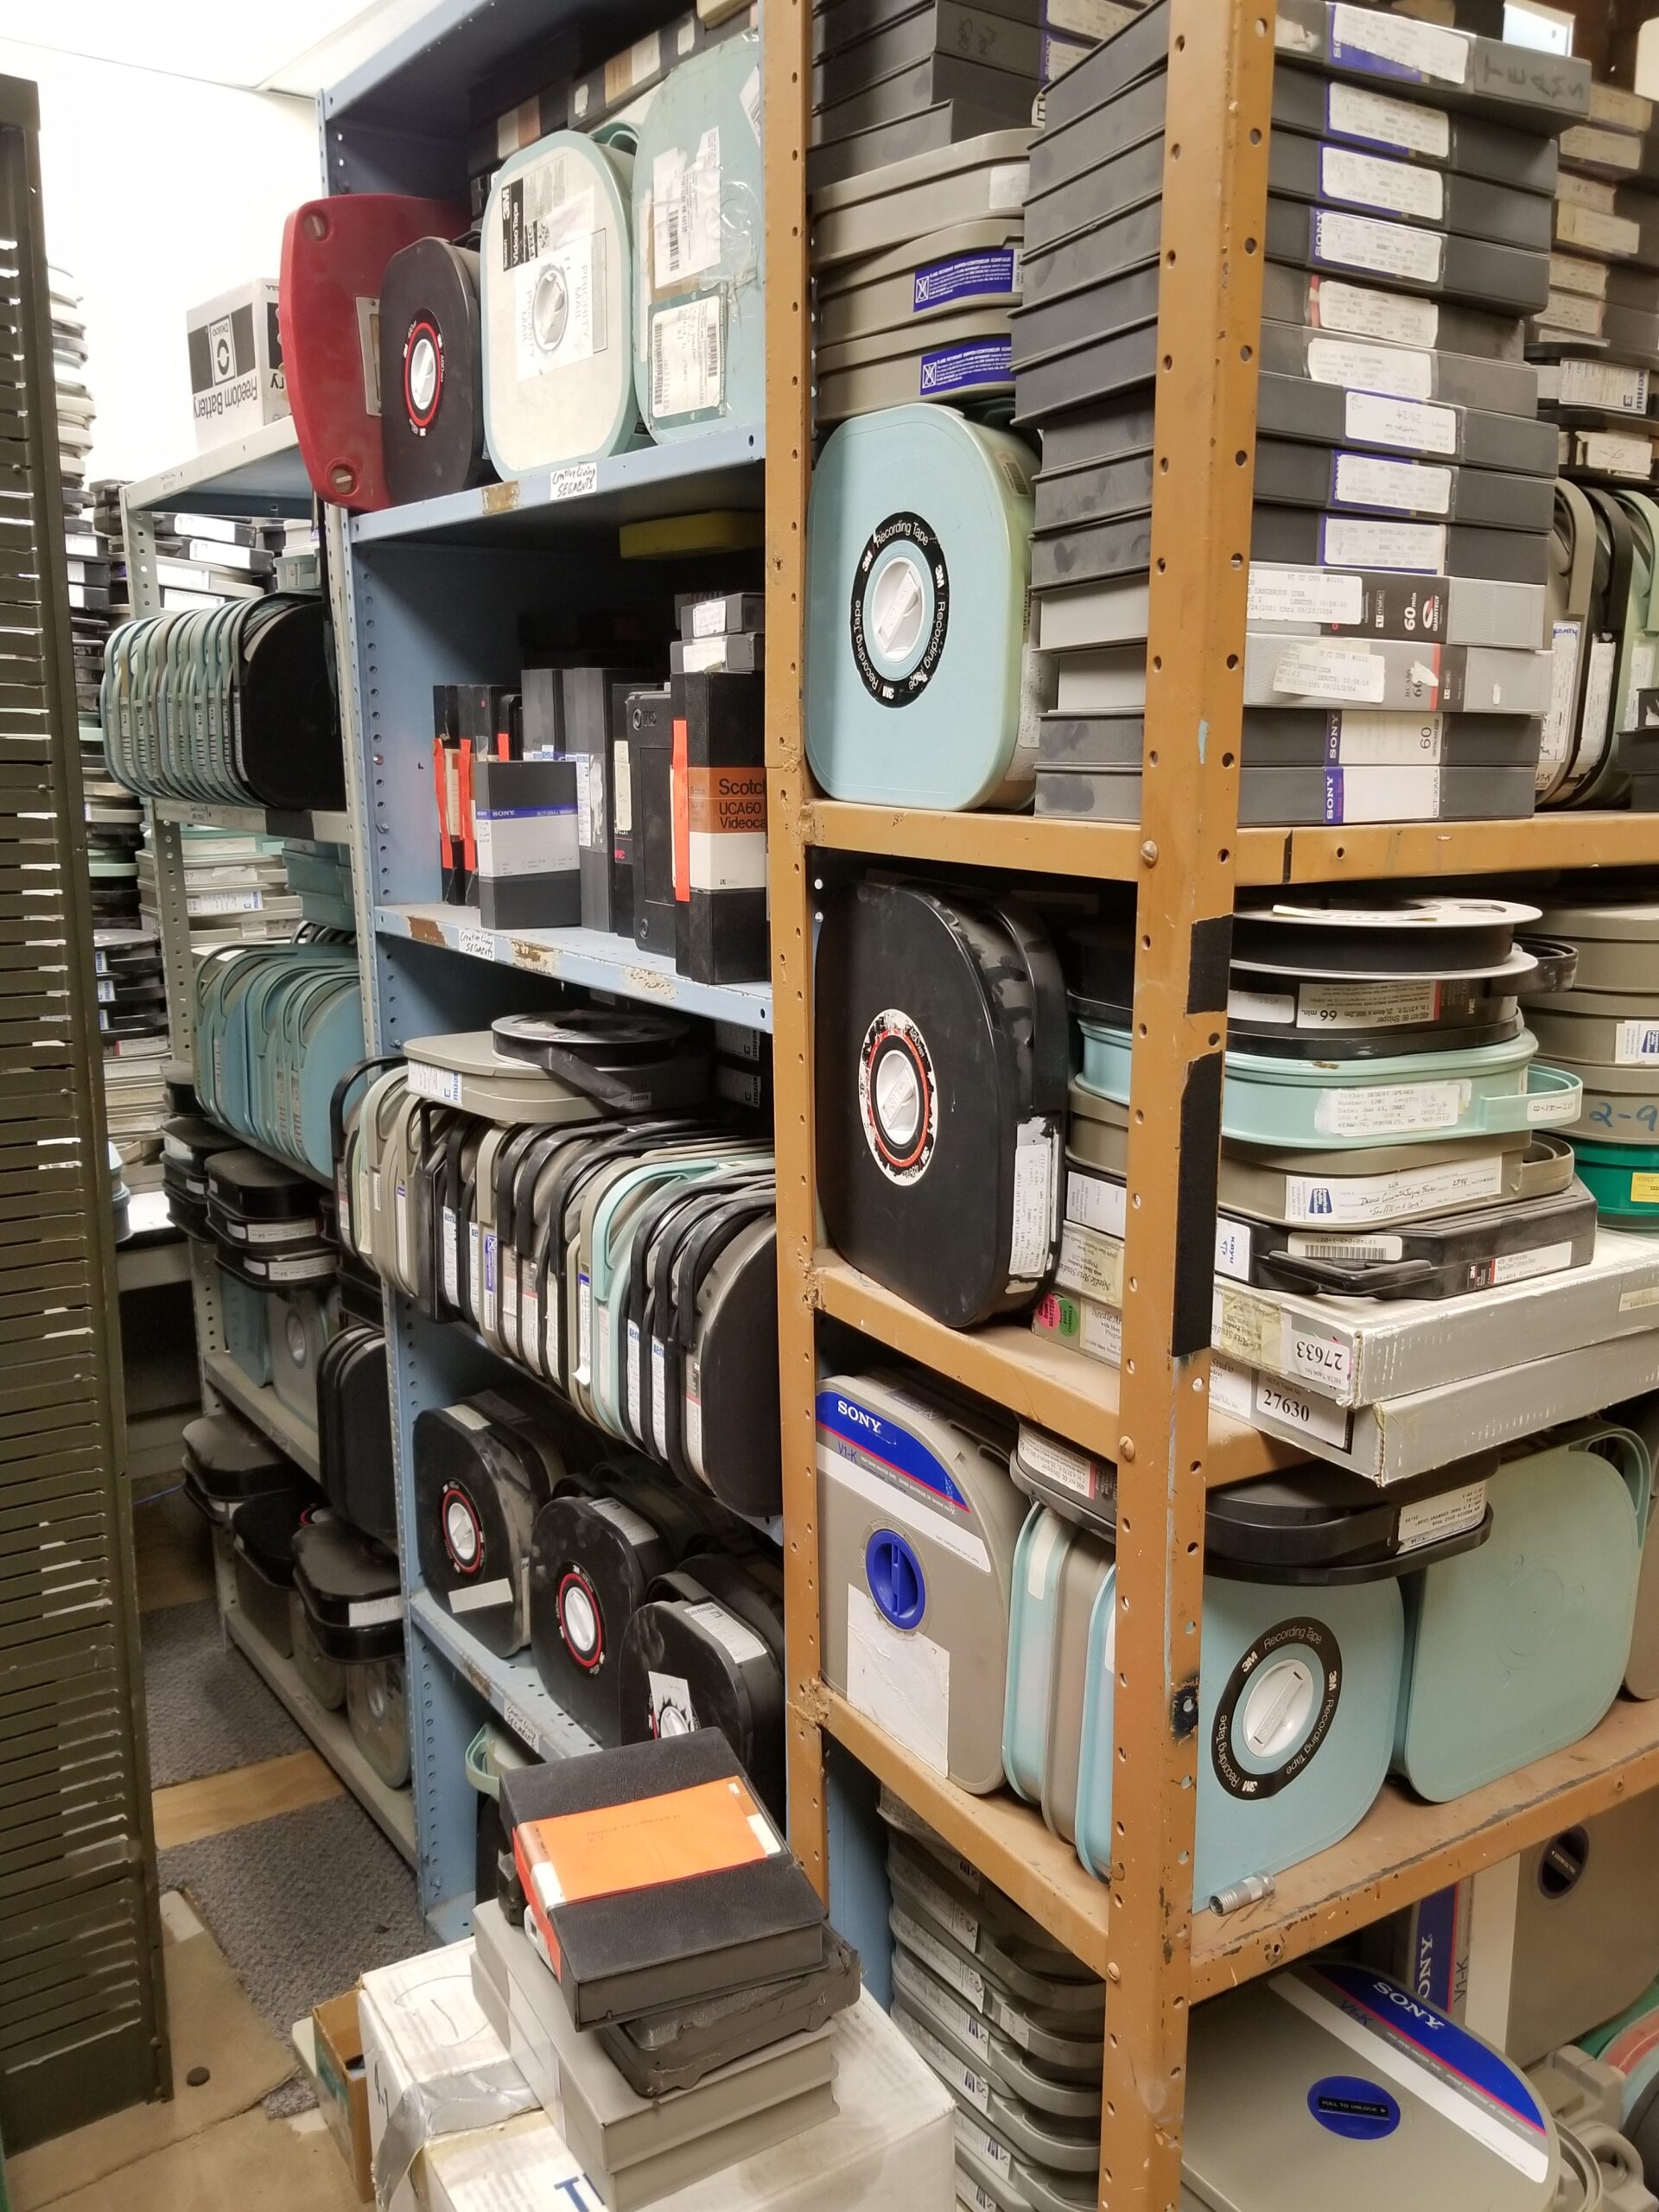 Legacy media tapes and reels in storage at KENW.